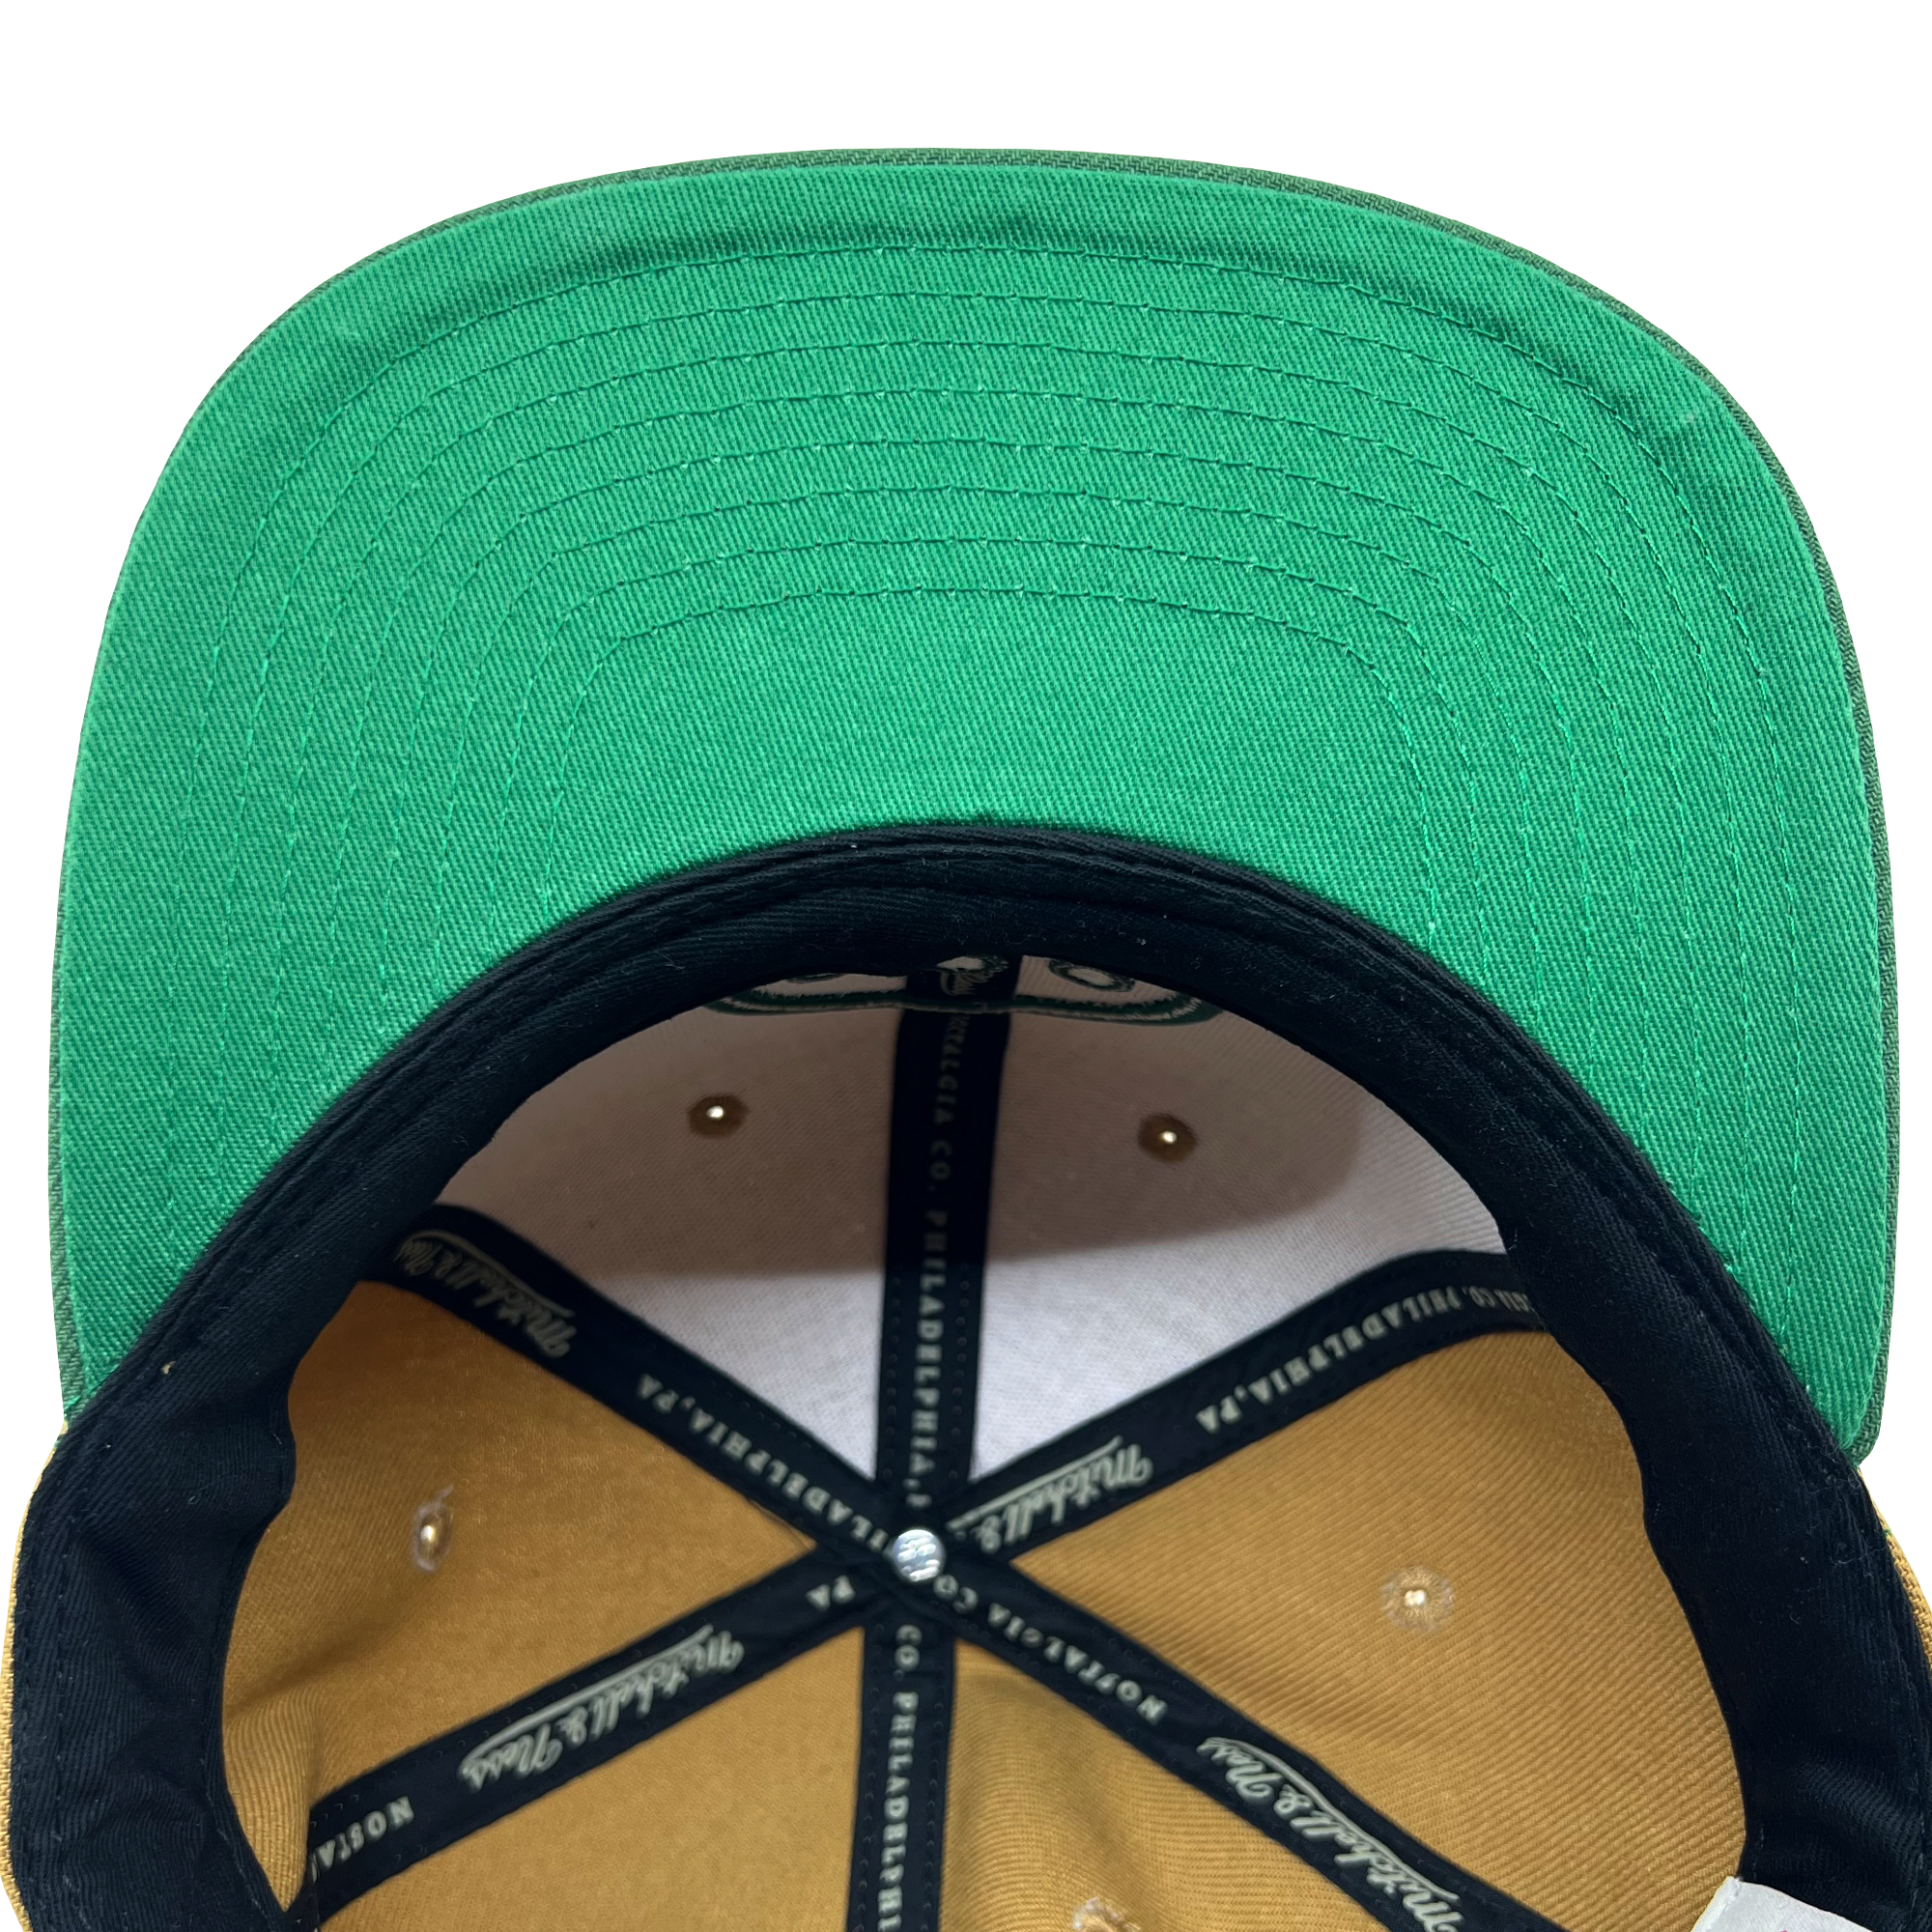 Detailed close-up of green undervisor and taping inside the crown of a Hiero hip hop X Mitchell & Ness cap.